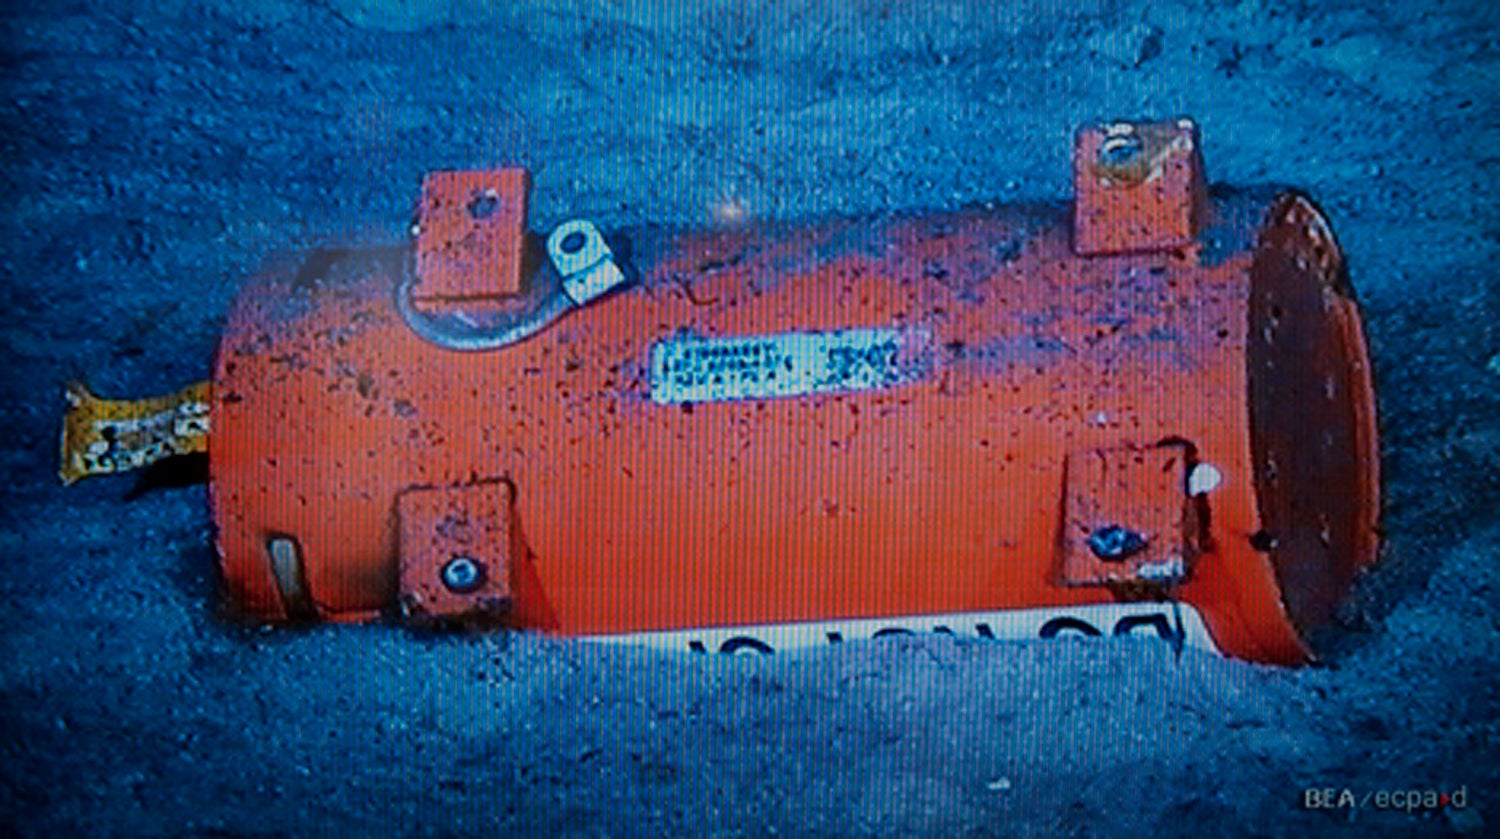 The FDR black box from Air France flight 447 at the bottom of the sea in 2009